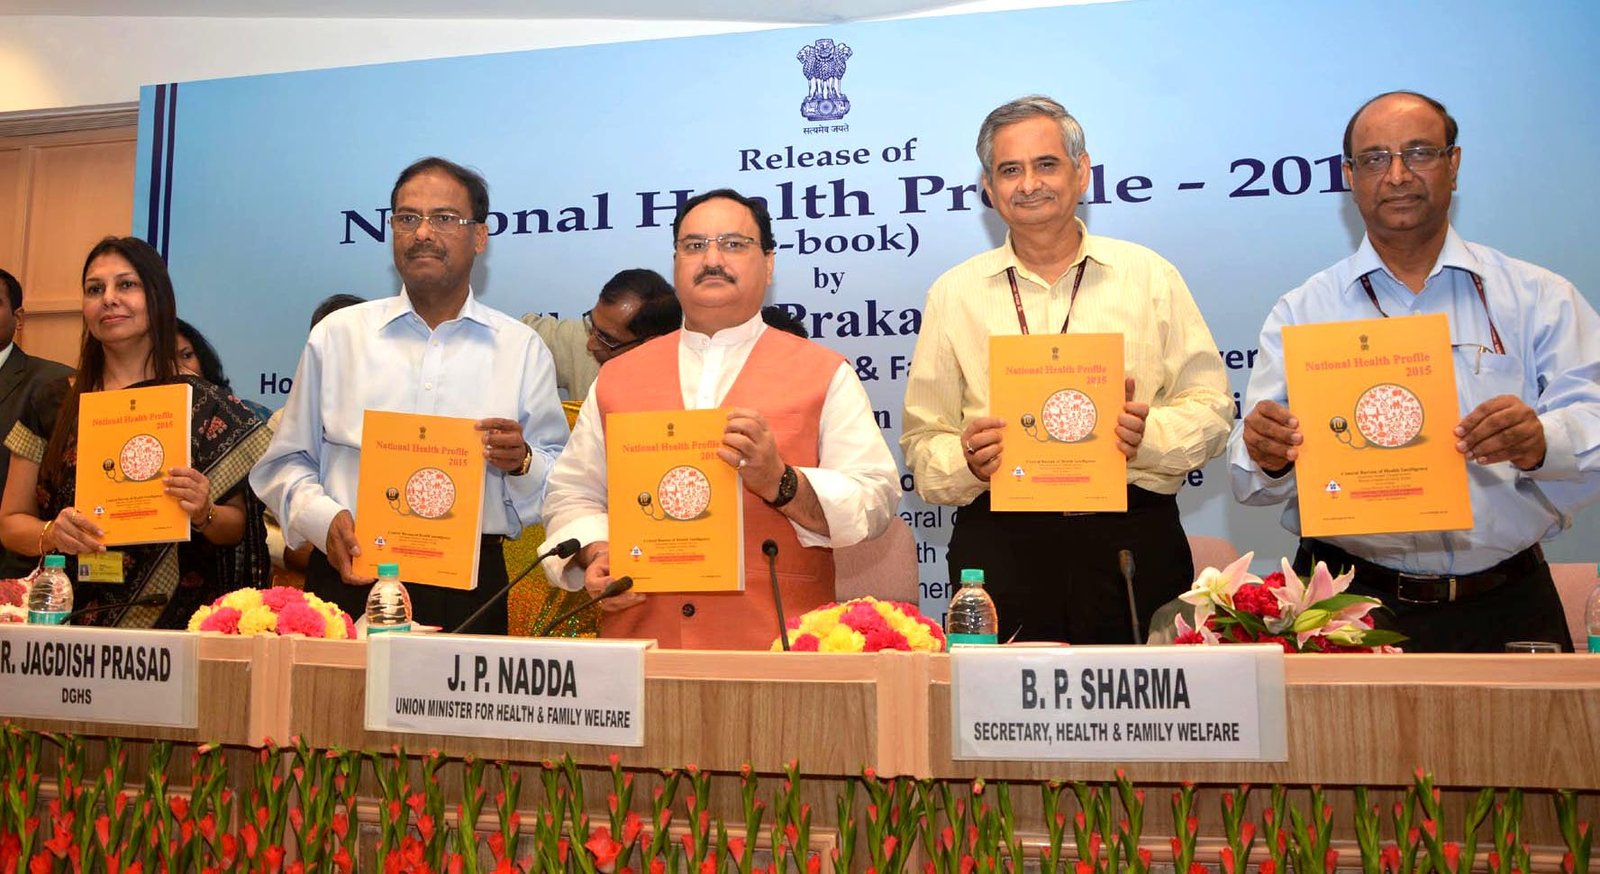 The union minister for health and family welfare, Mr J P Nadda releasing the â€œNational Health Profile-2015â€?, published by the Central Bureau of Health Intelligence (CBHI), in New Delhi on September 22, 2015